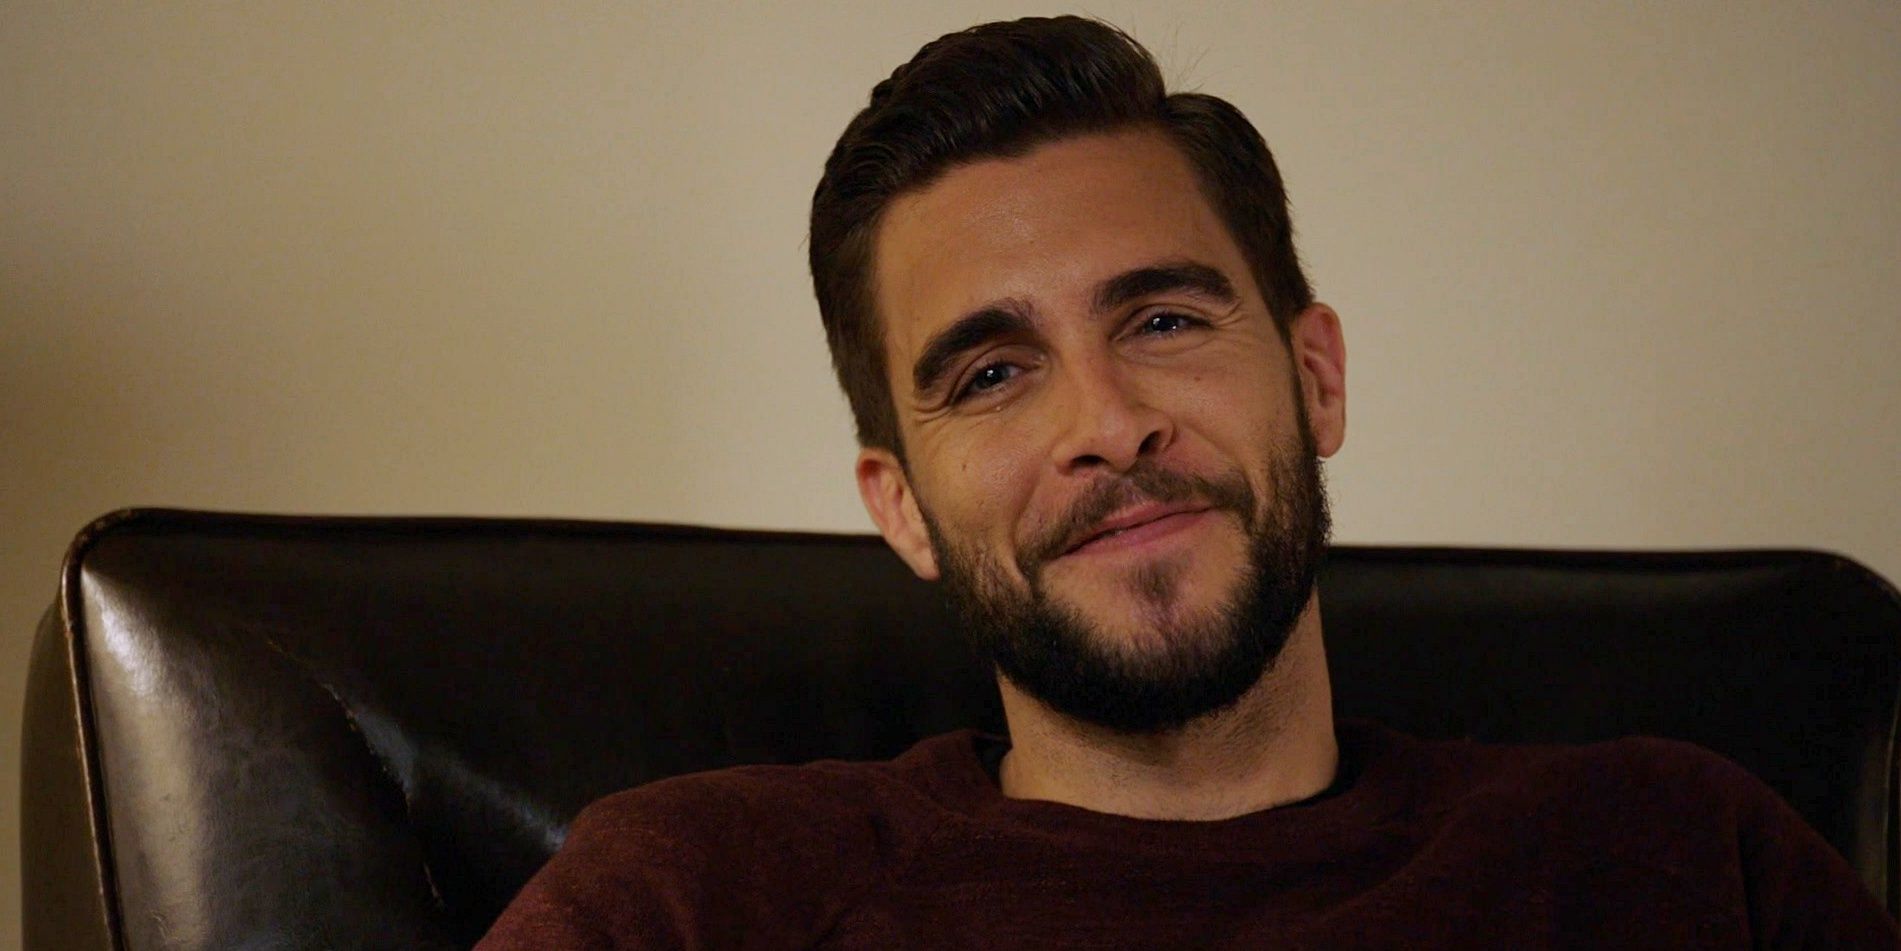 Justin Voight, played by Josh Segarra, wears a maroon sweater in the Chicago PD season 3 finale.